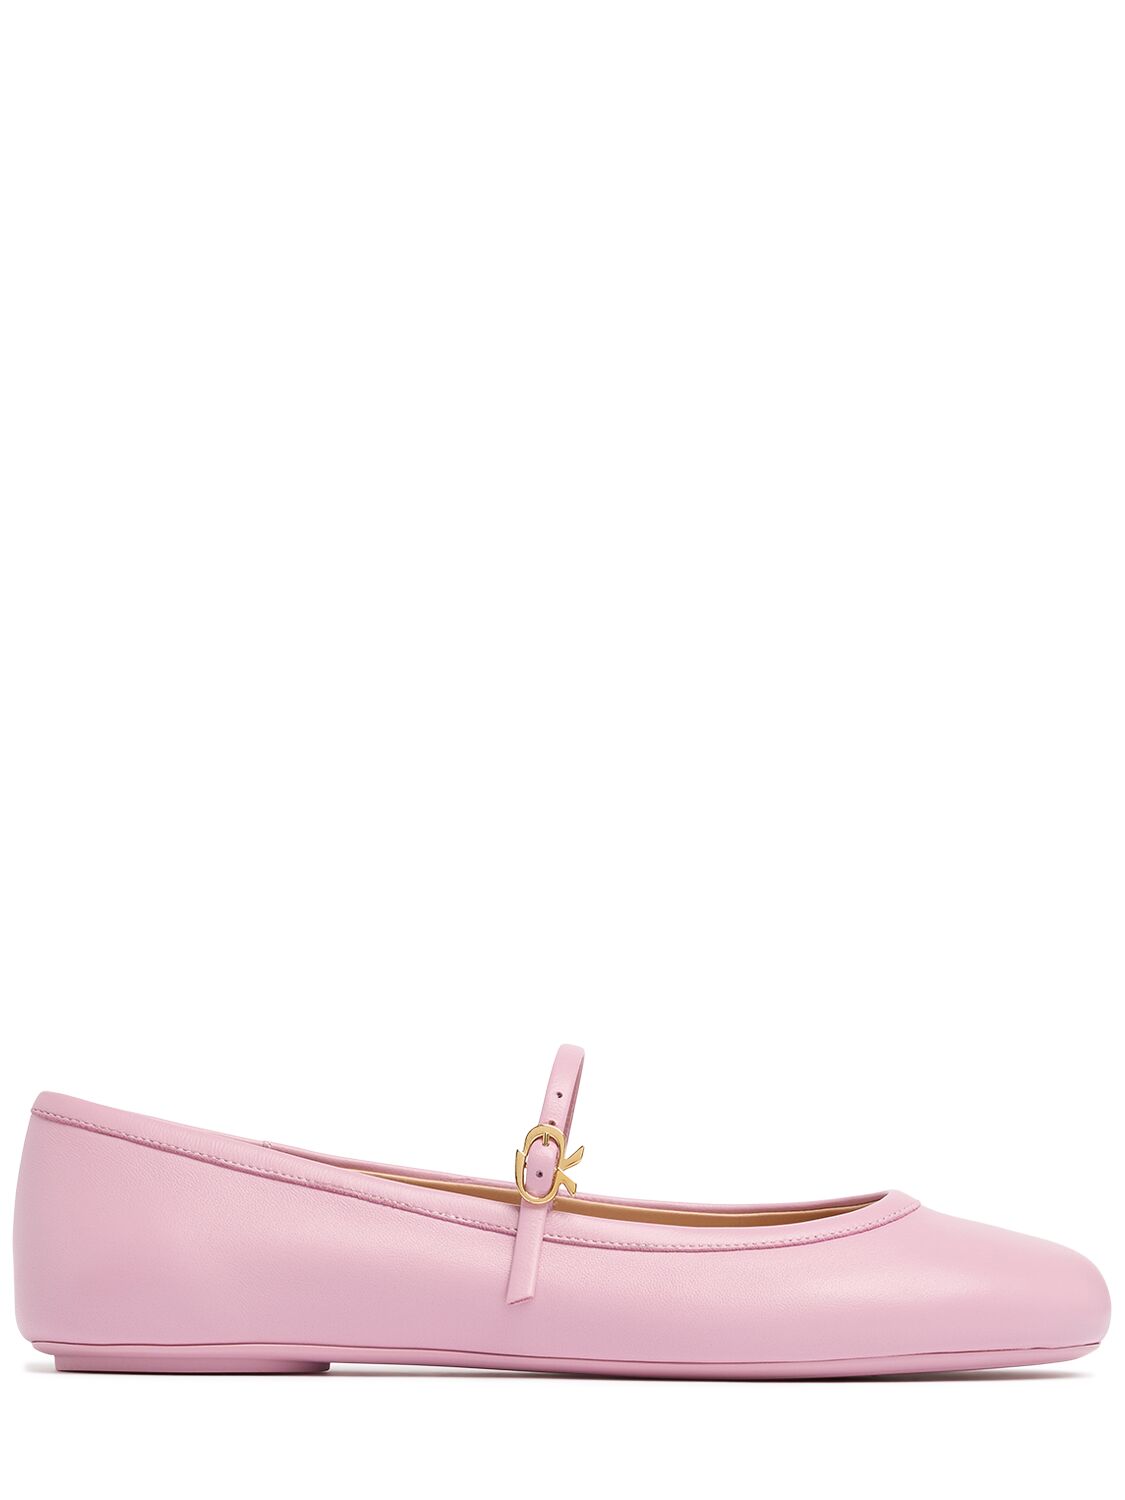 Gianvito Rossi 10mm Carla Soft Leather Ballerina Flats In Pink